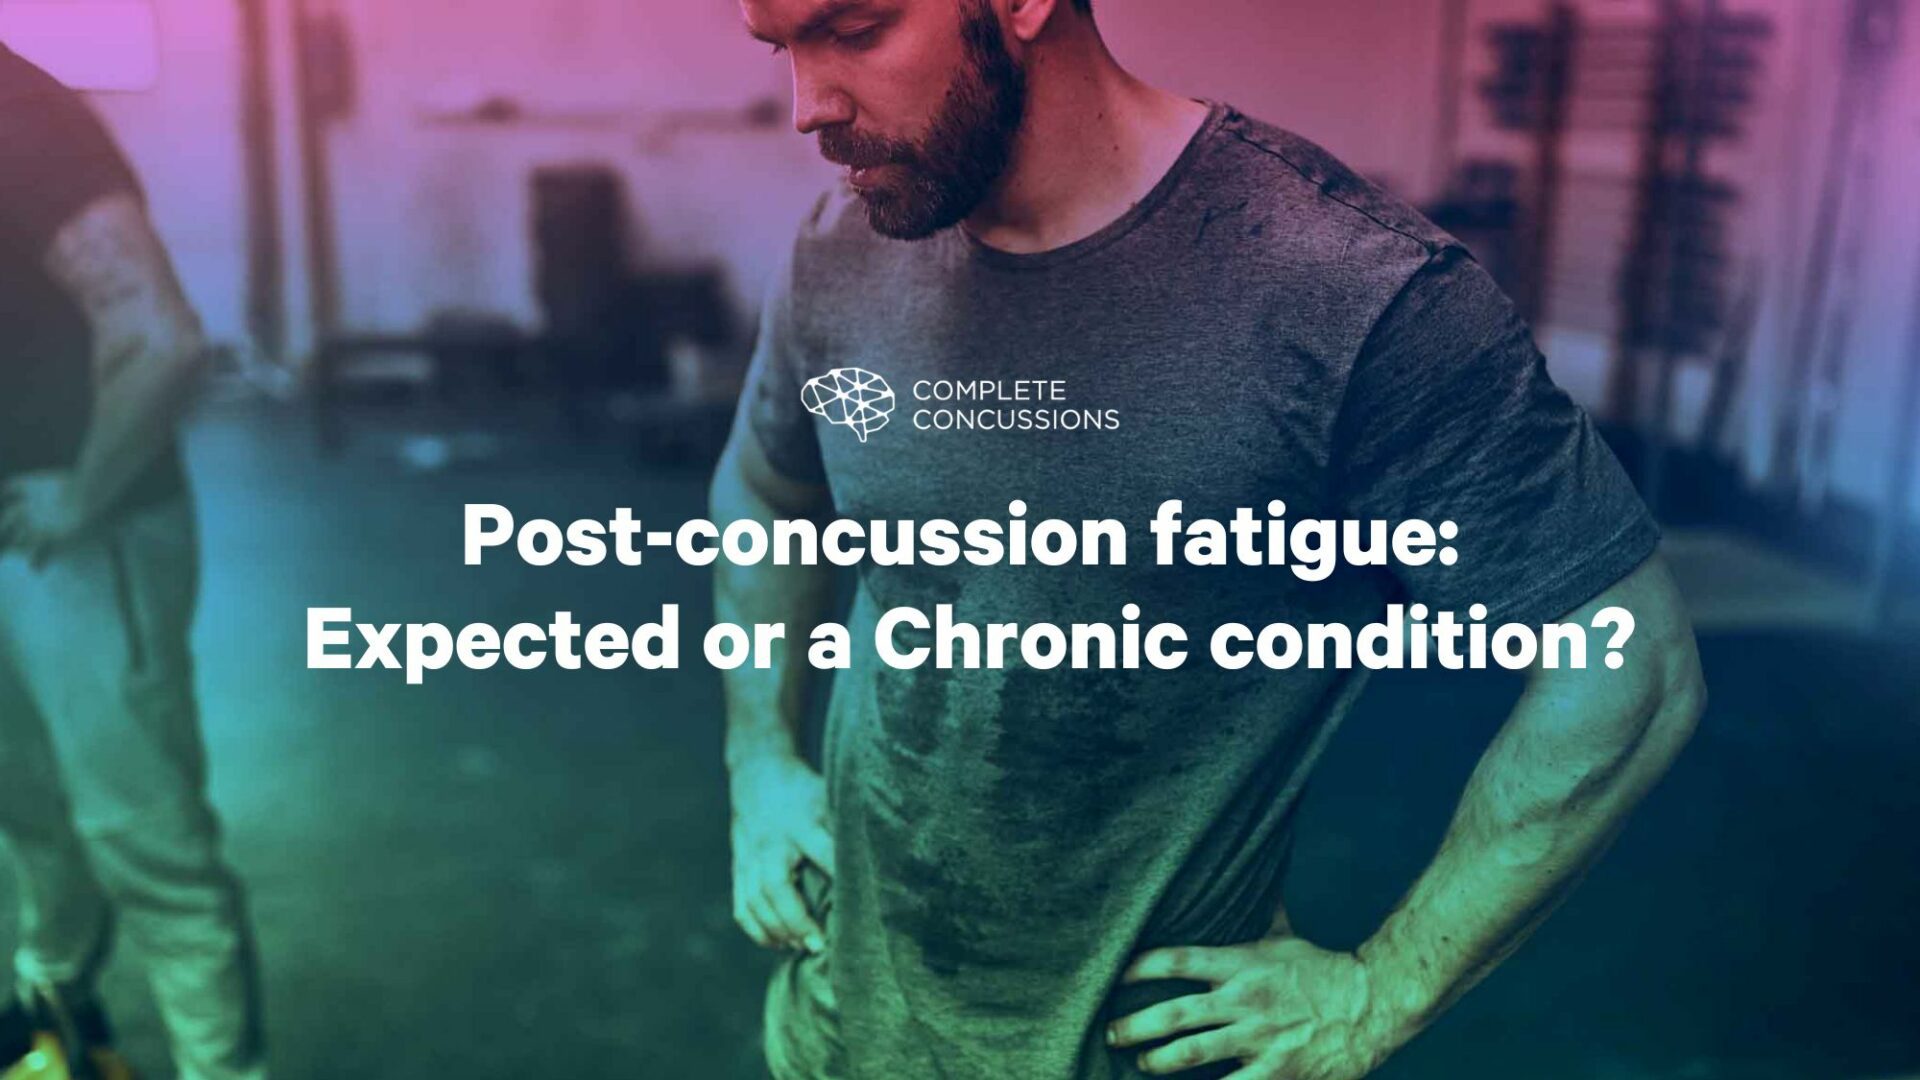 Post-concussion fatigue: Expected or a Chronic condition?